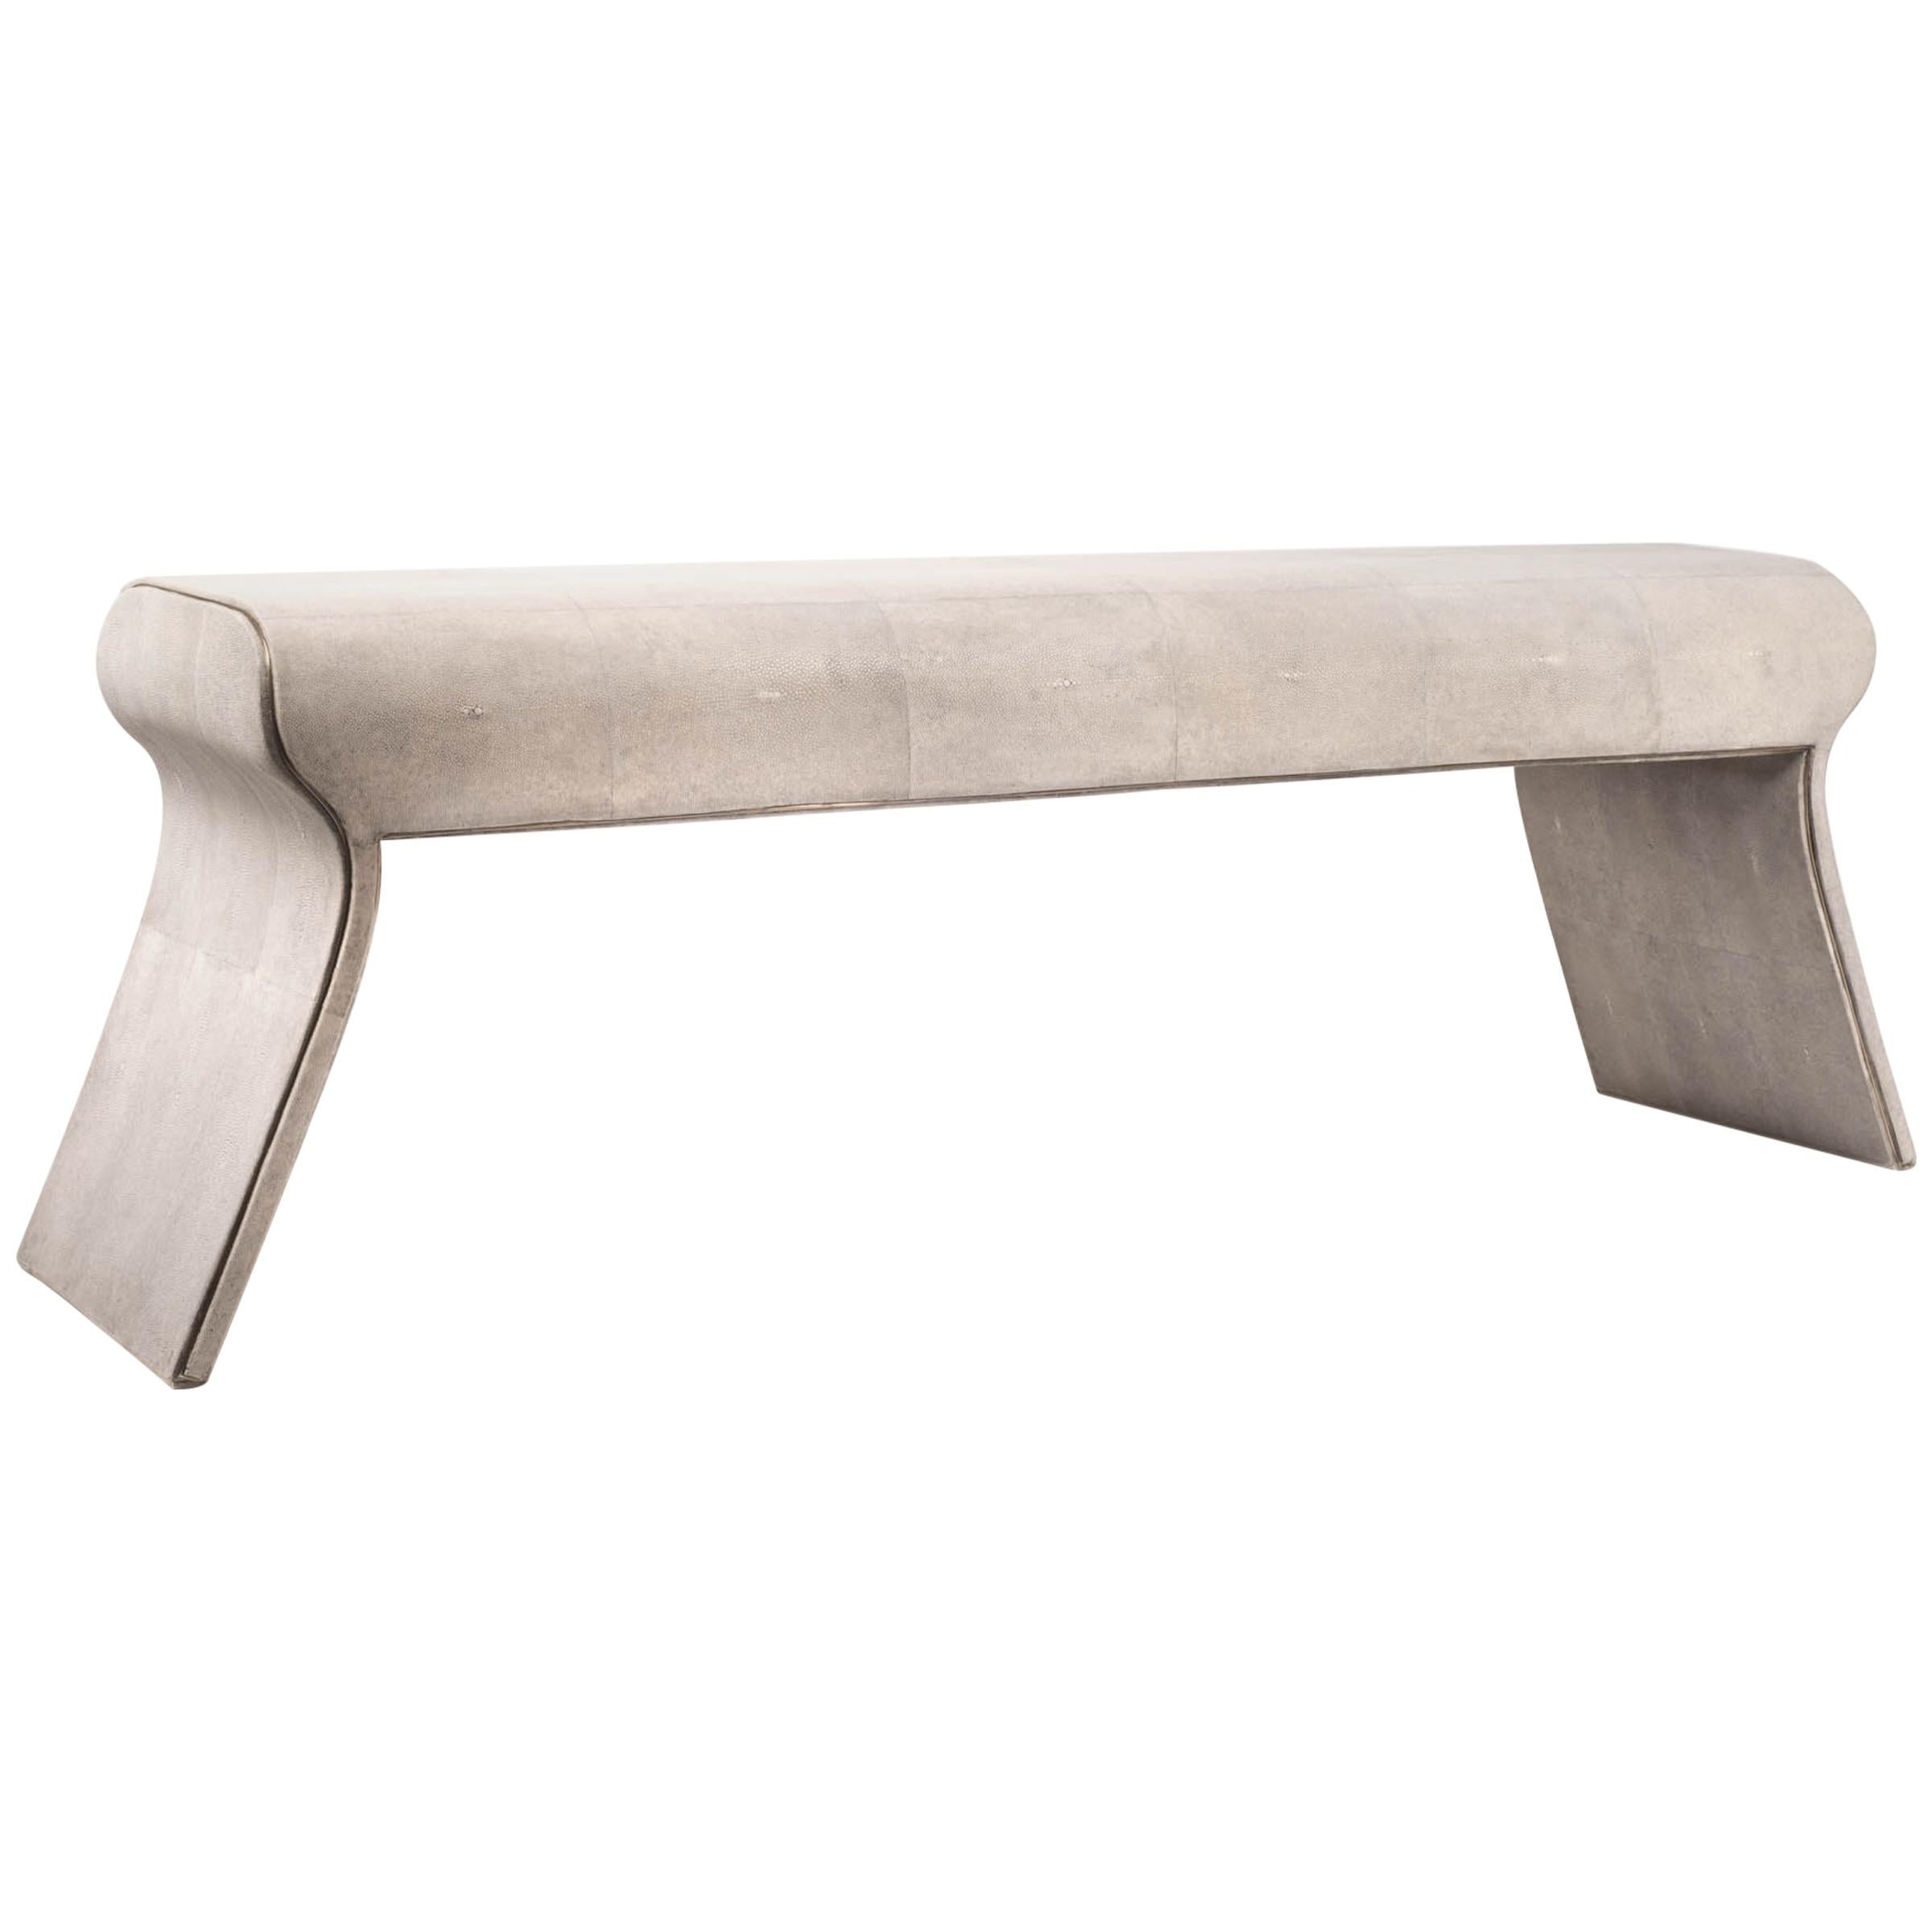 Contemporary Dandy Day Bench in Cream Shagreen and Bronze-Patina Brass by Kifu Paris For Sale